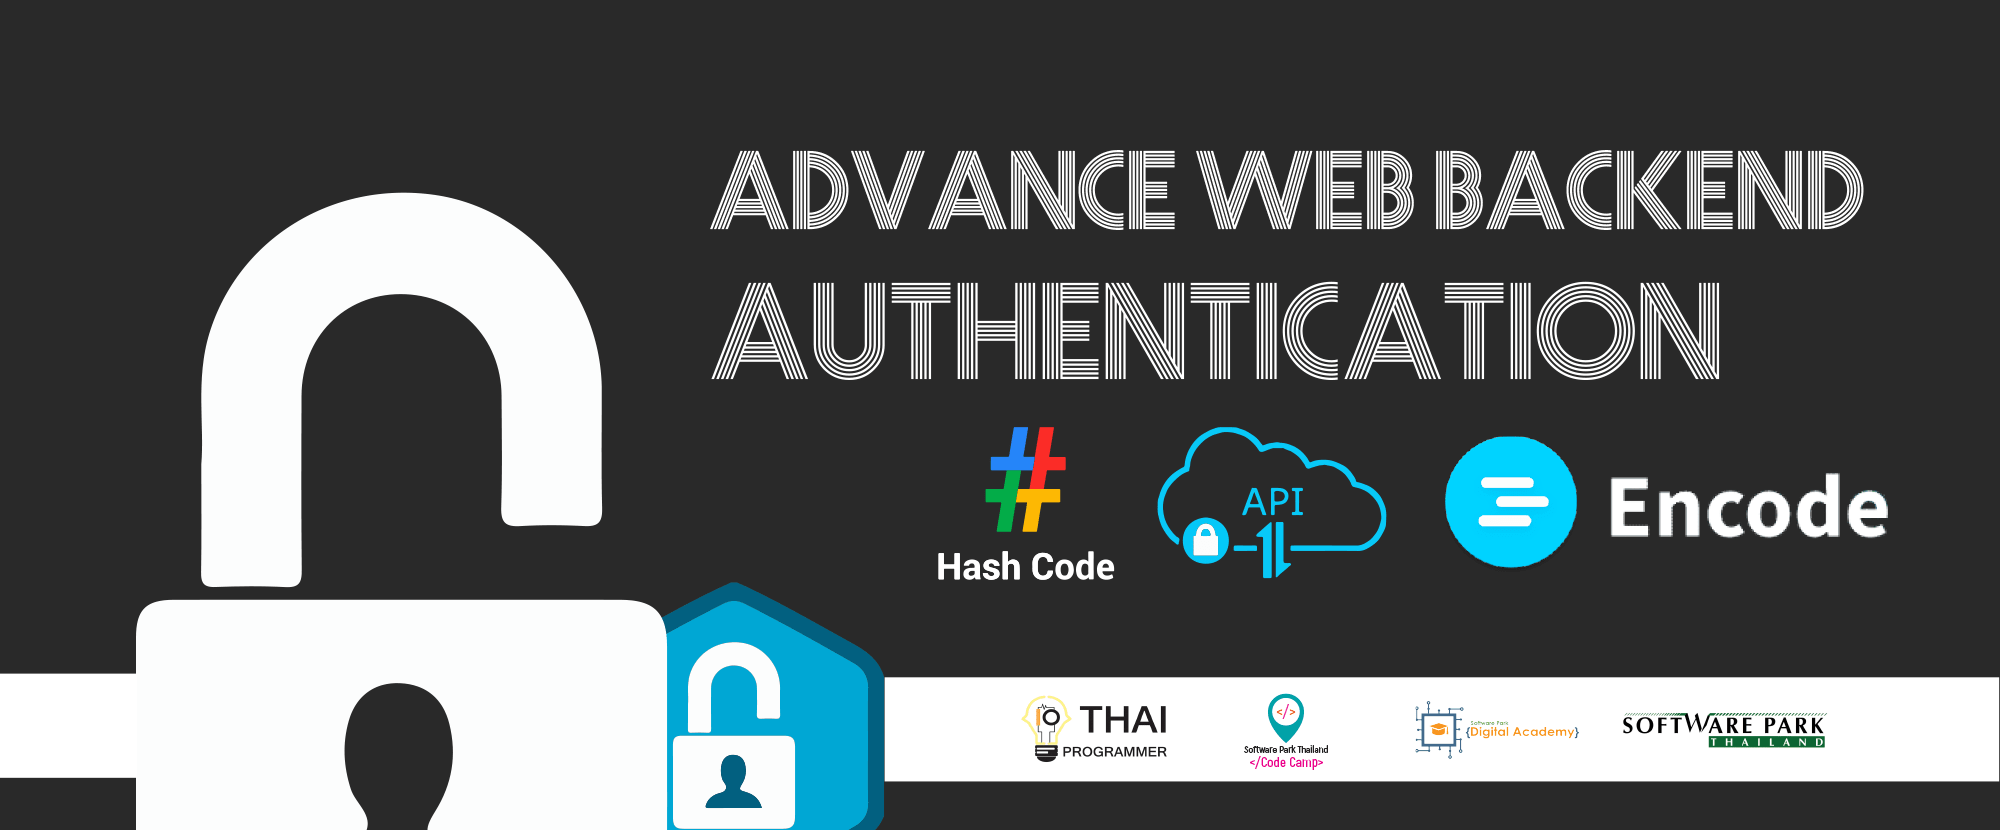 ADVANCE WEB BACKEND, AUTHENTICATION CODECAMP